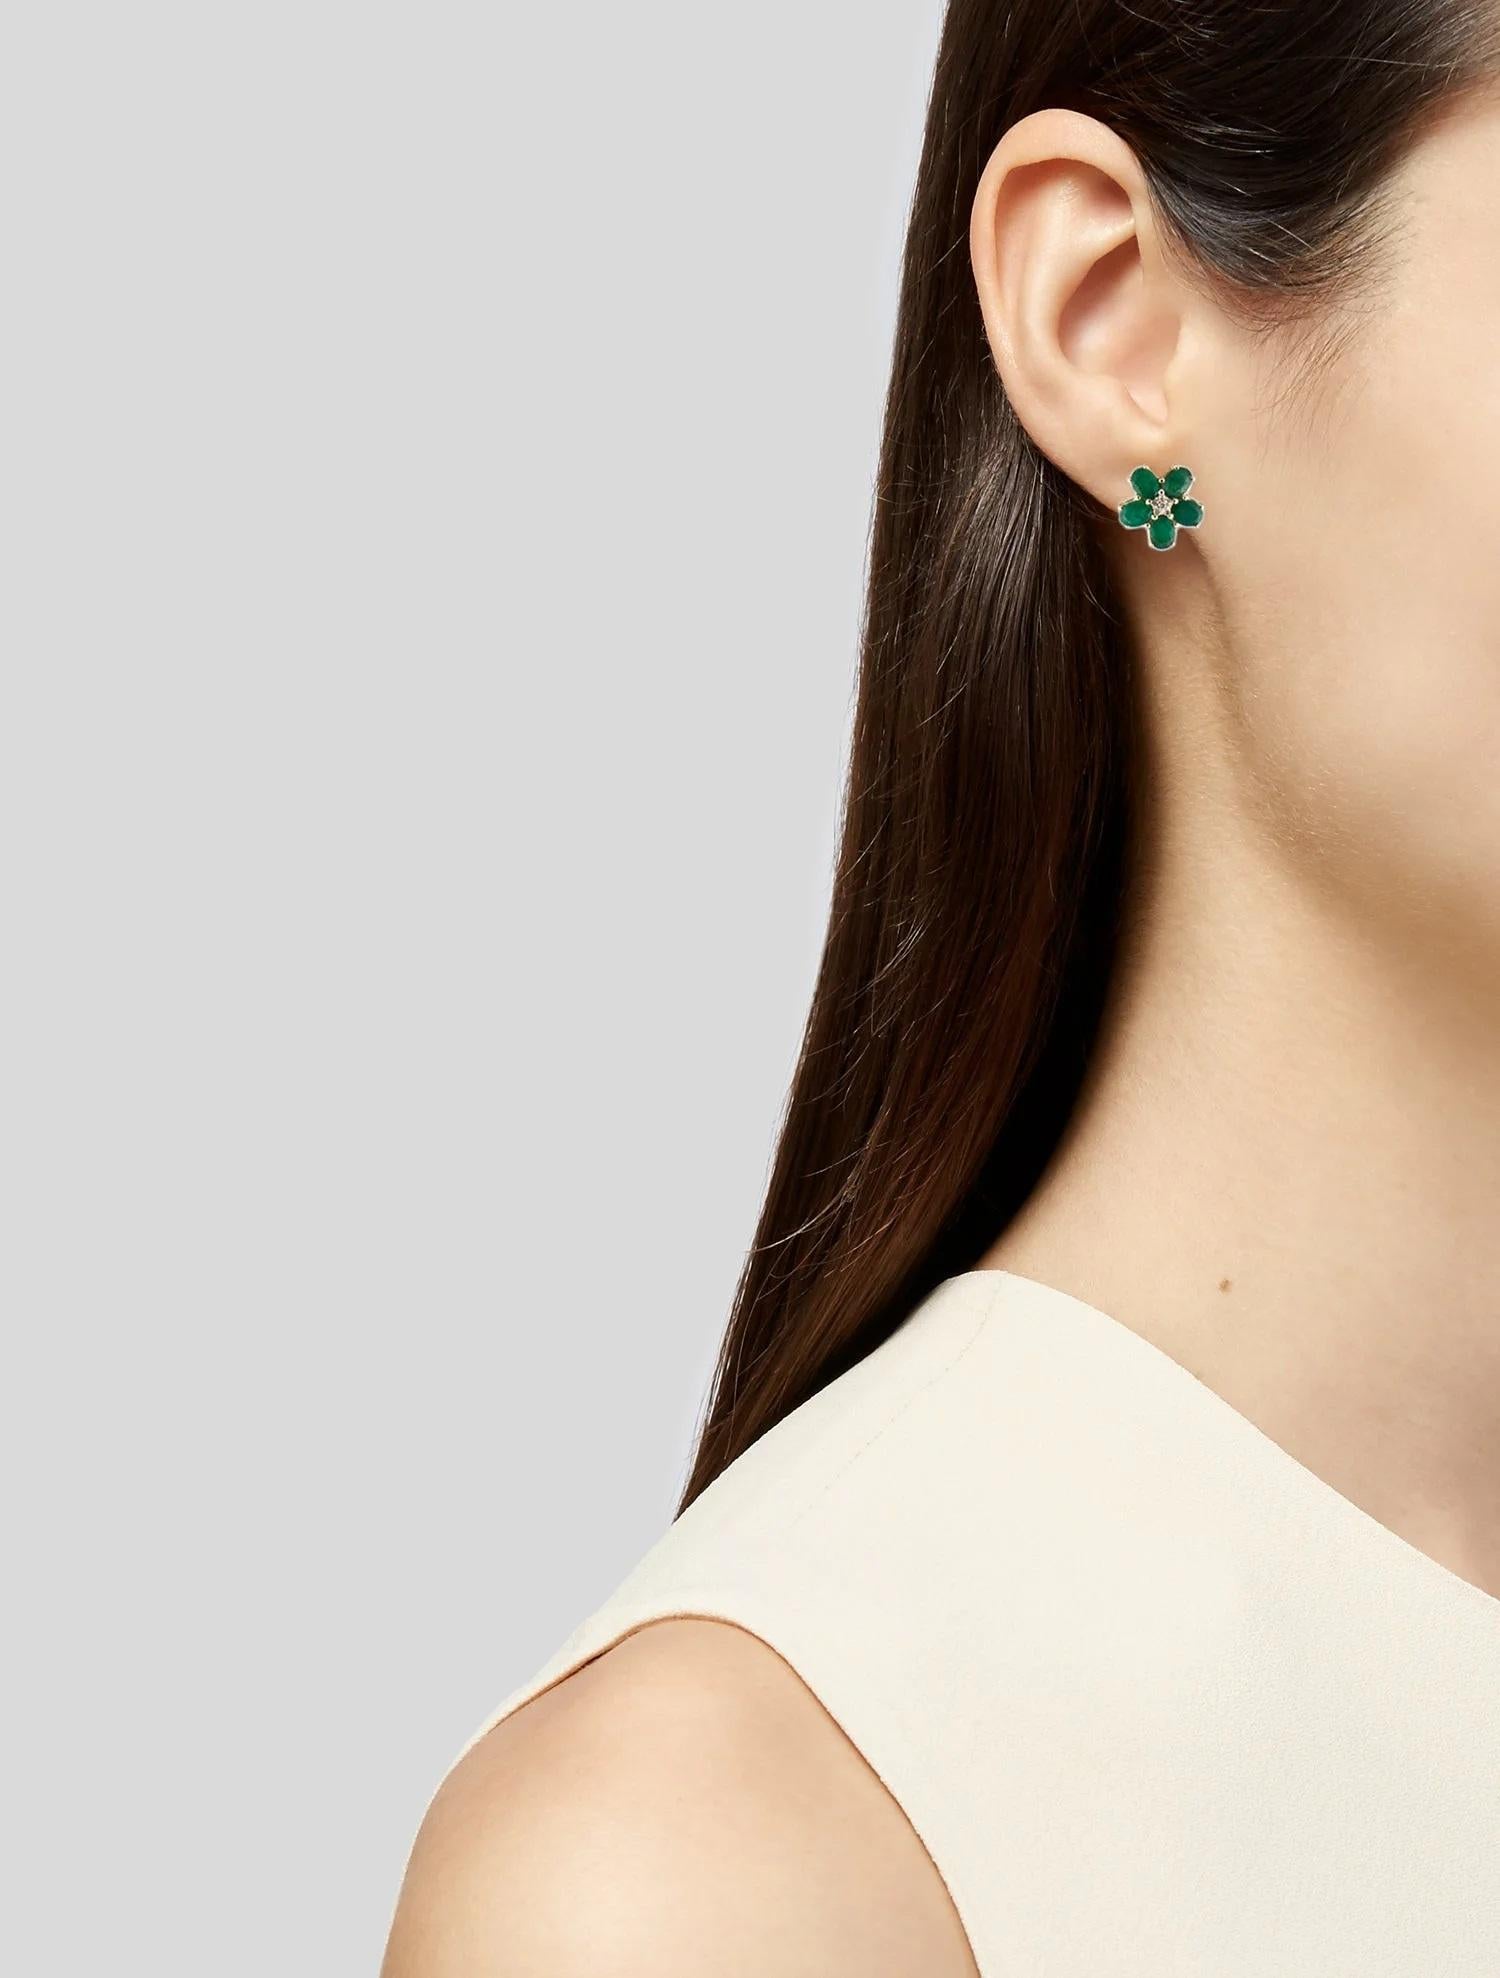 Indulge in the allure of sophistication with these magnificent 14K yellow gold earrings, featuring the captivating beauty of 2.38 carat oval brilliant emeralds, complemented by the sparkling elegance of round brilliant and single-cut diamonds. These